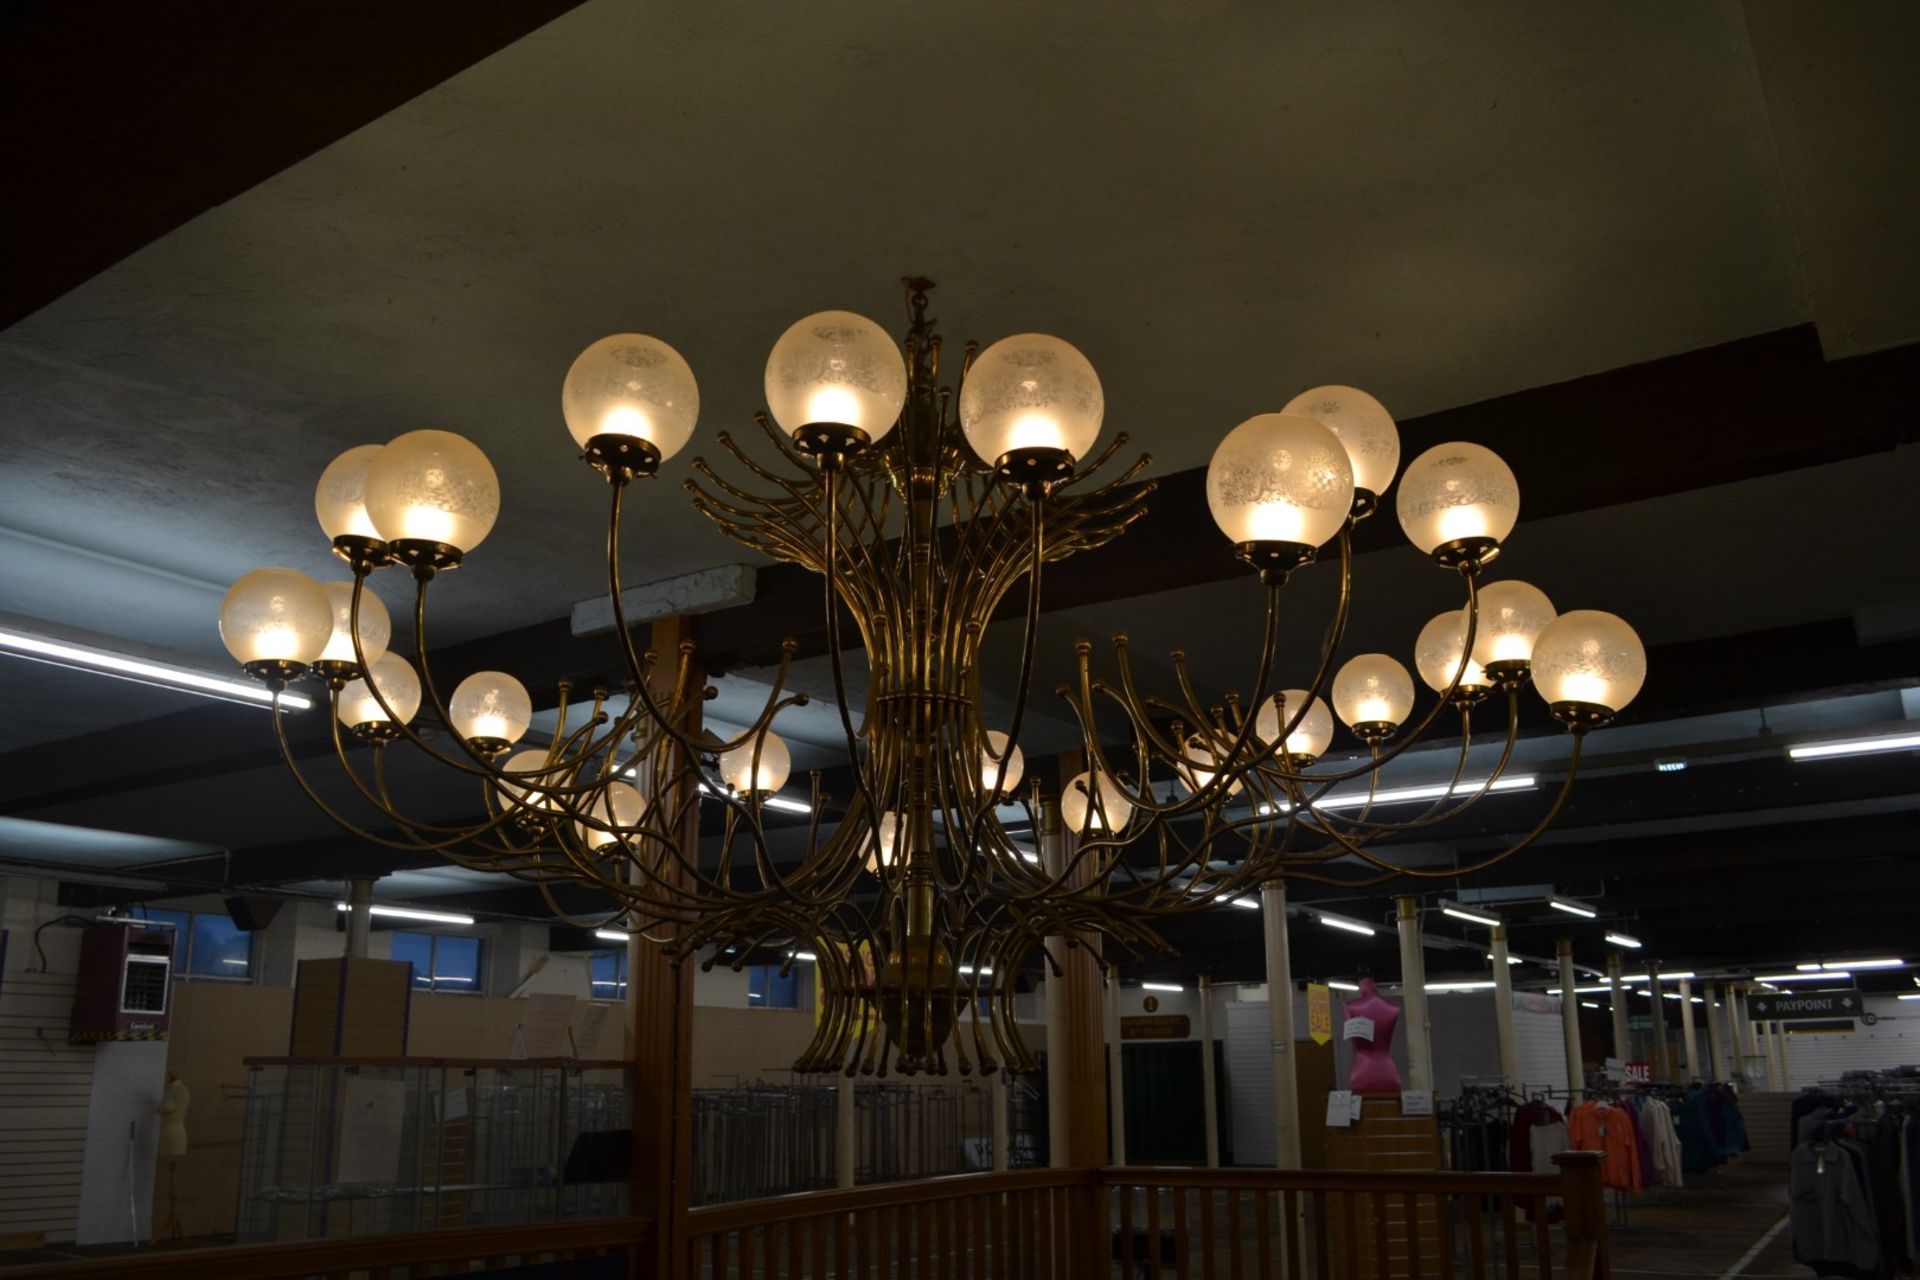 1 x Vintage 24 Light Brass Chandelier With Opaque Globe Shades - 261 cms Width - Ref BB000 - CL351 - - Image 7 of 7